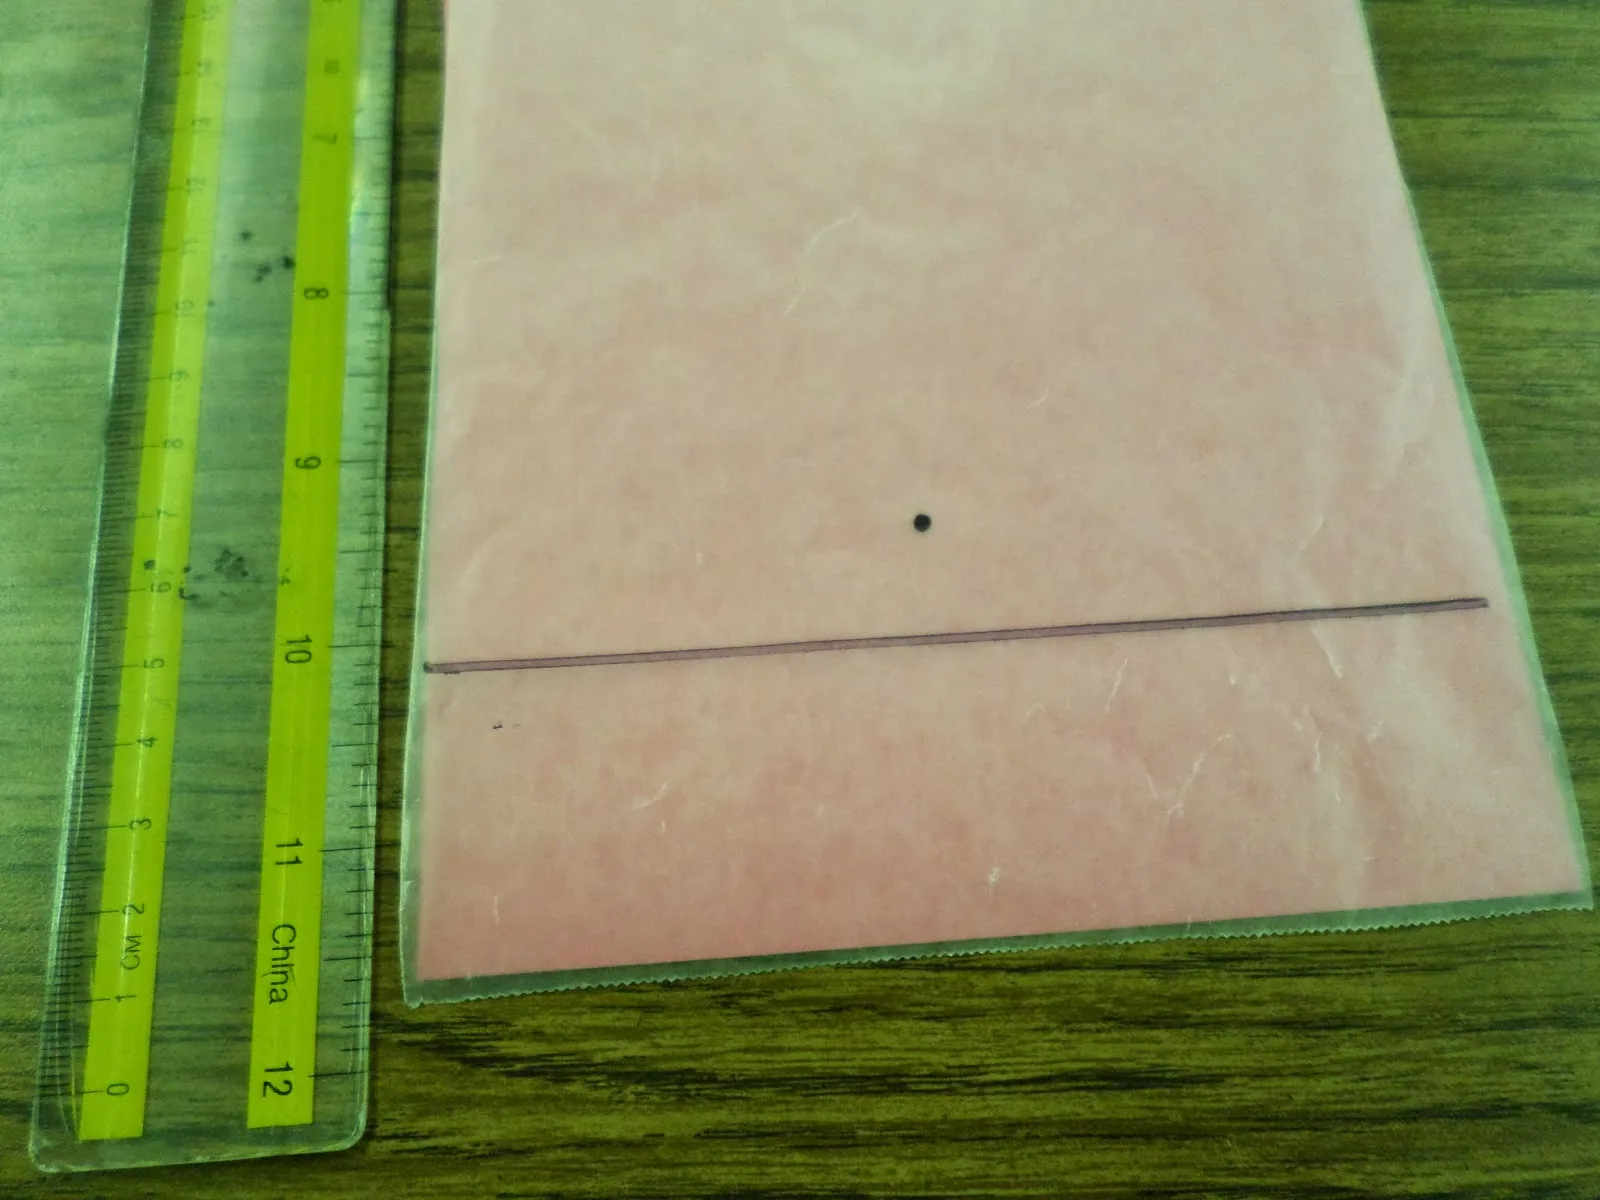 focus dot drawn above horizontal line on wax paper for wax paper parabola activity. 